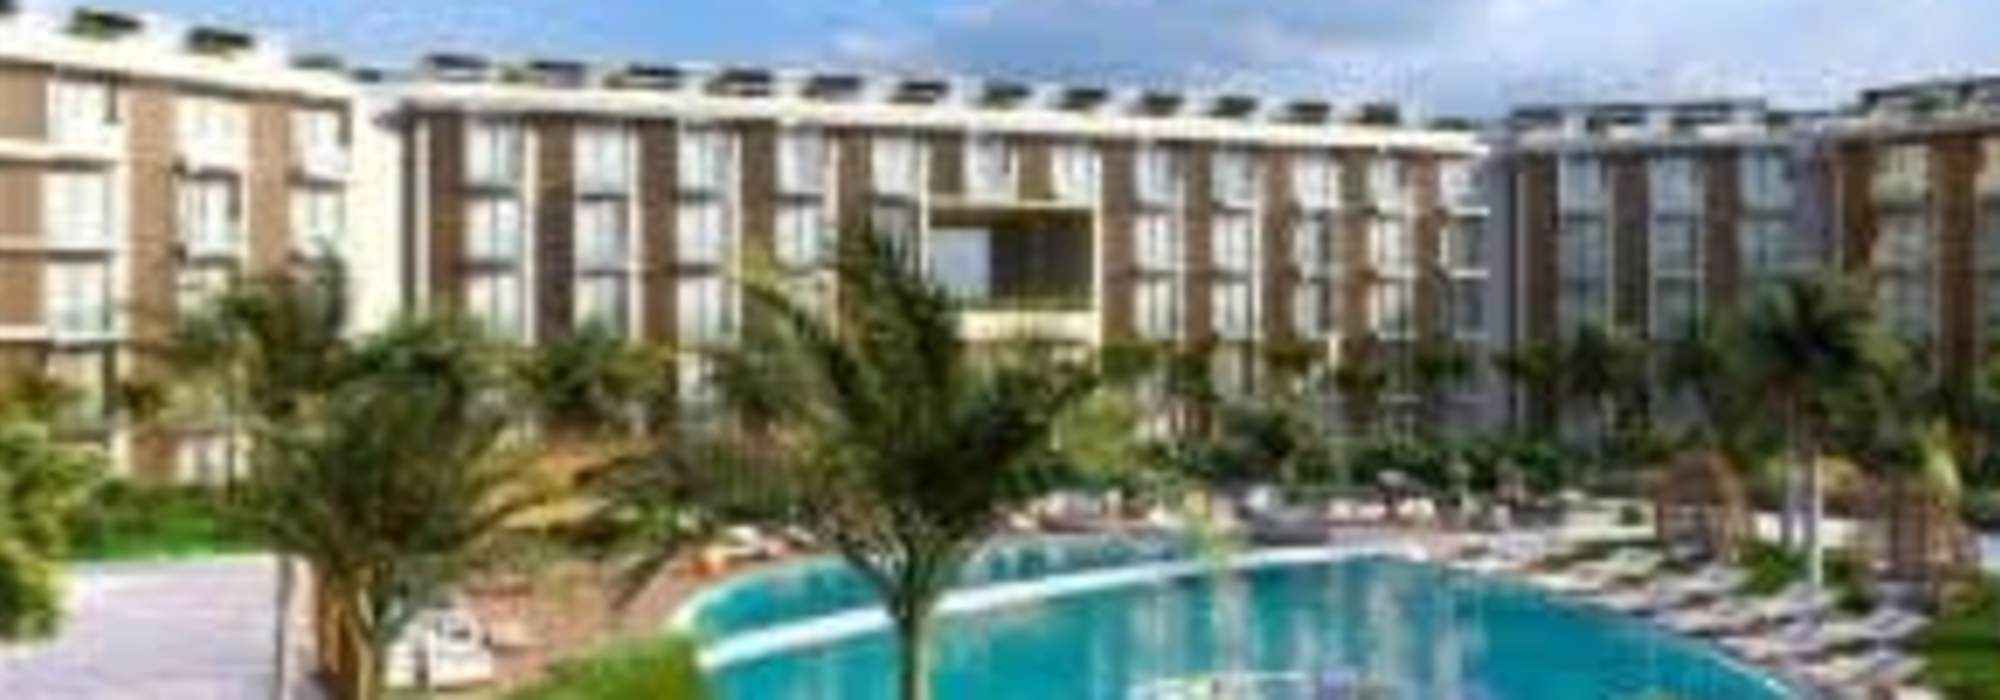 Apartment for sale Punta Cana